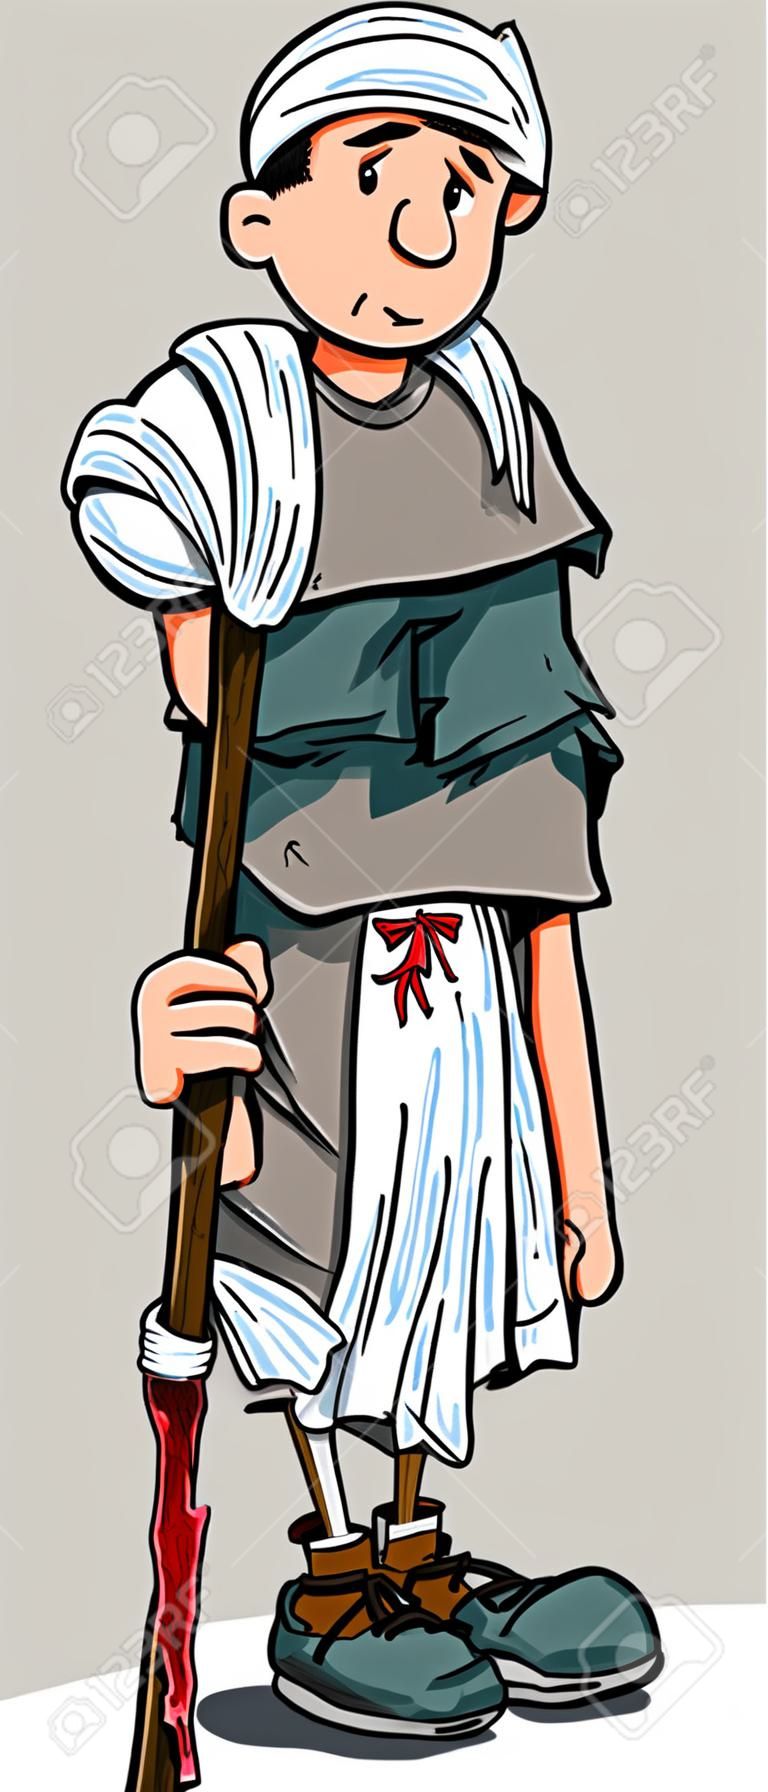 Cartoon injured man with walking stick and bandages. Isolated